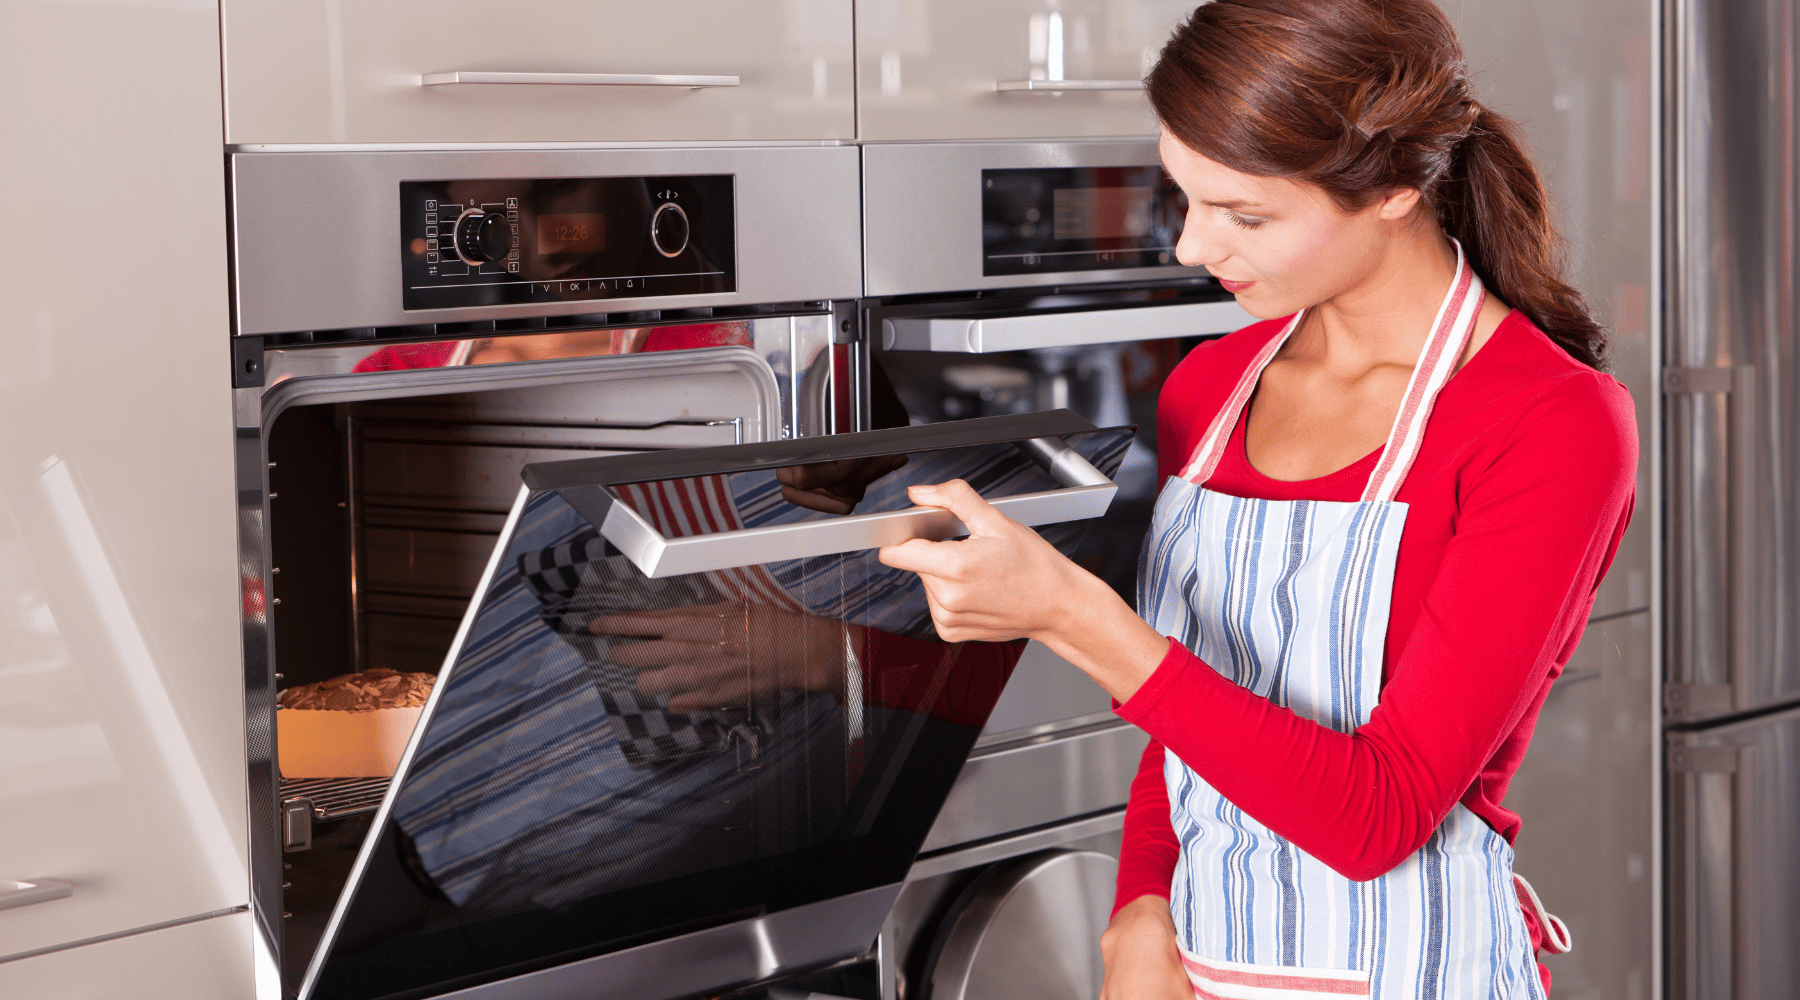 Cooking with Ovens